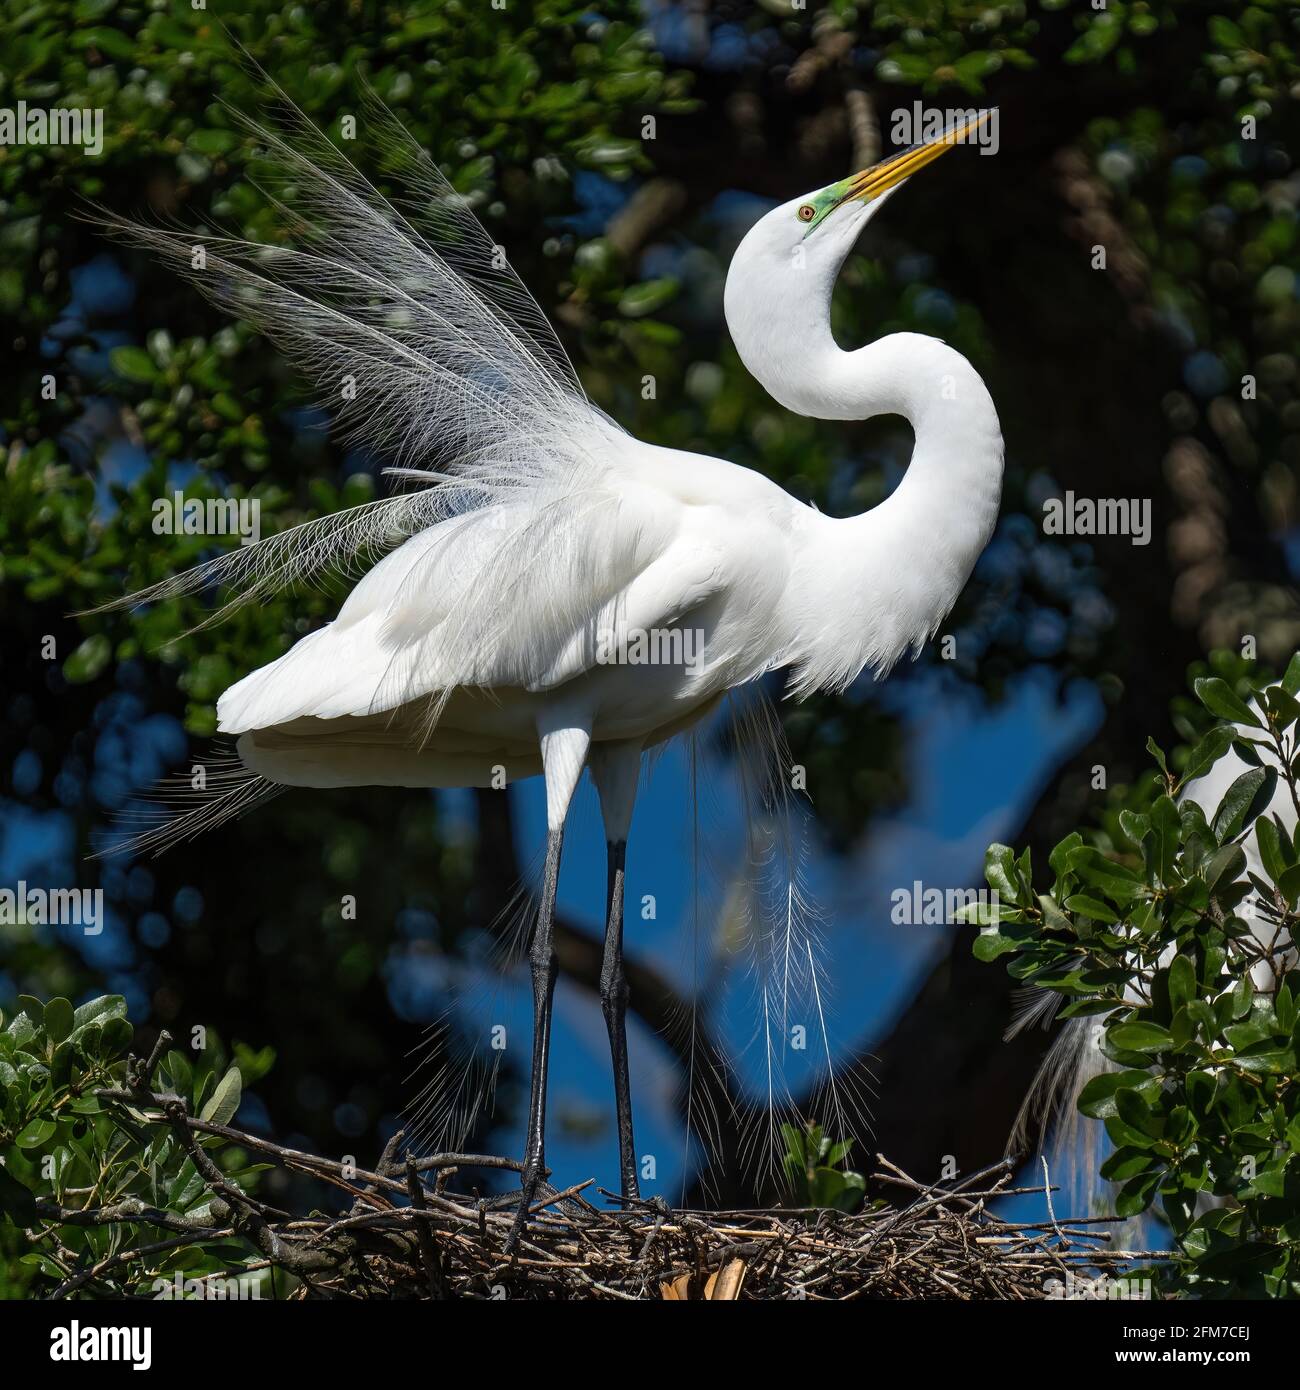 A great egret displaying. Stock Photo